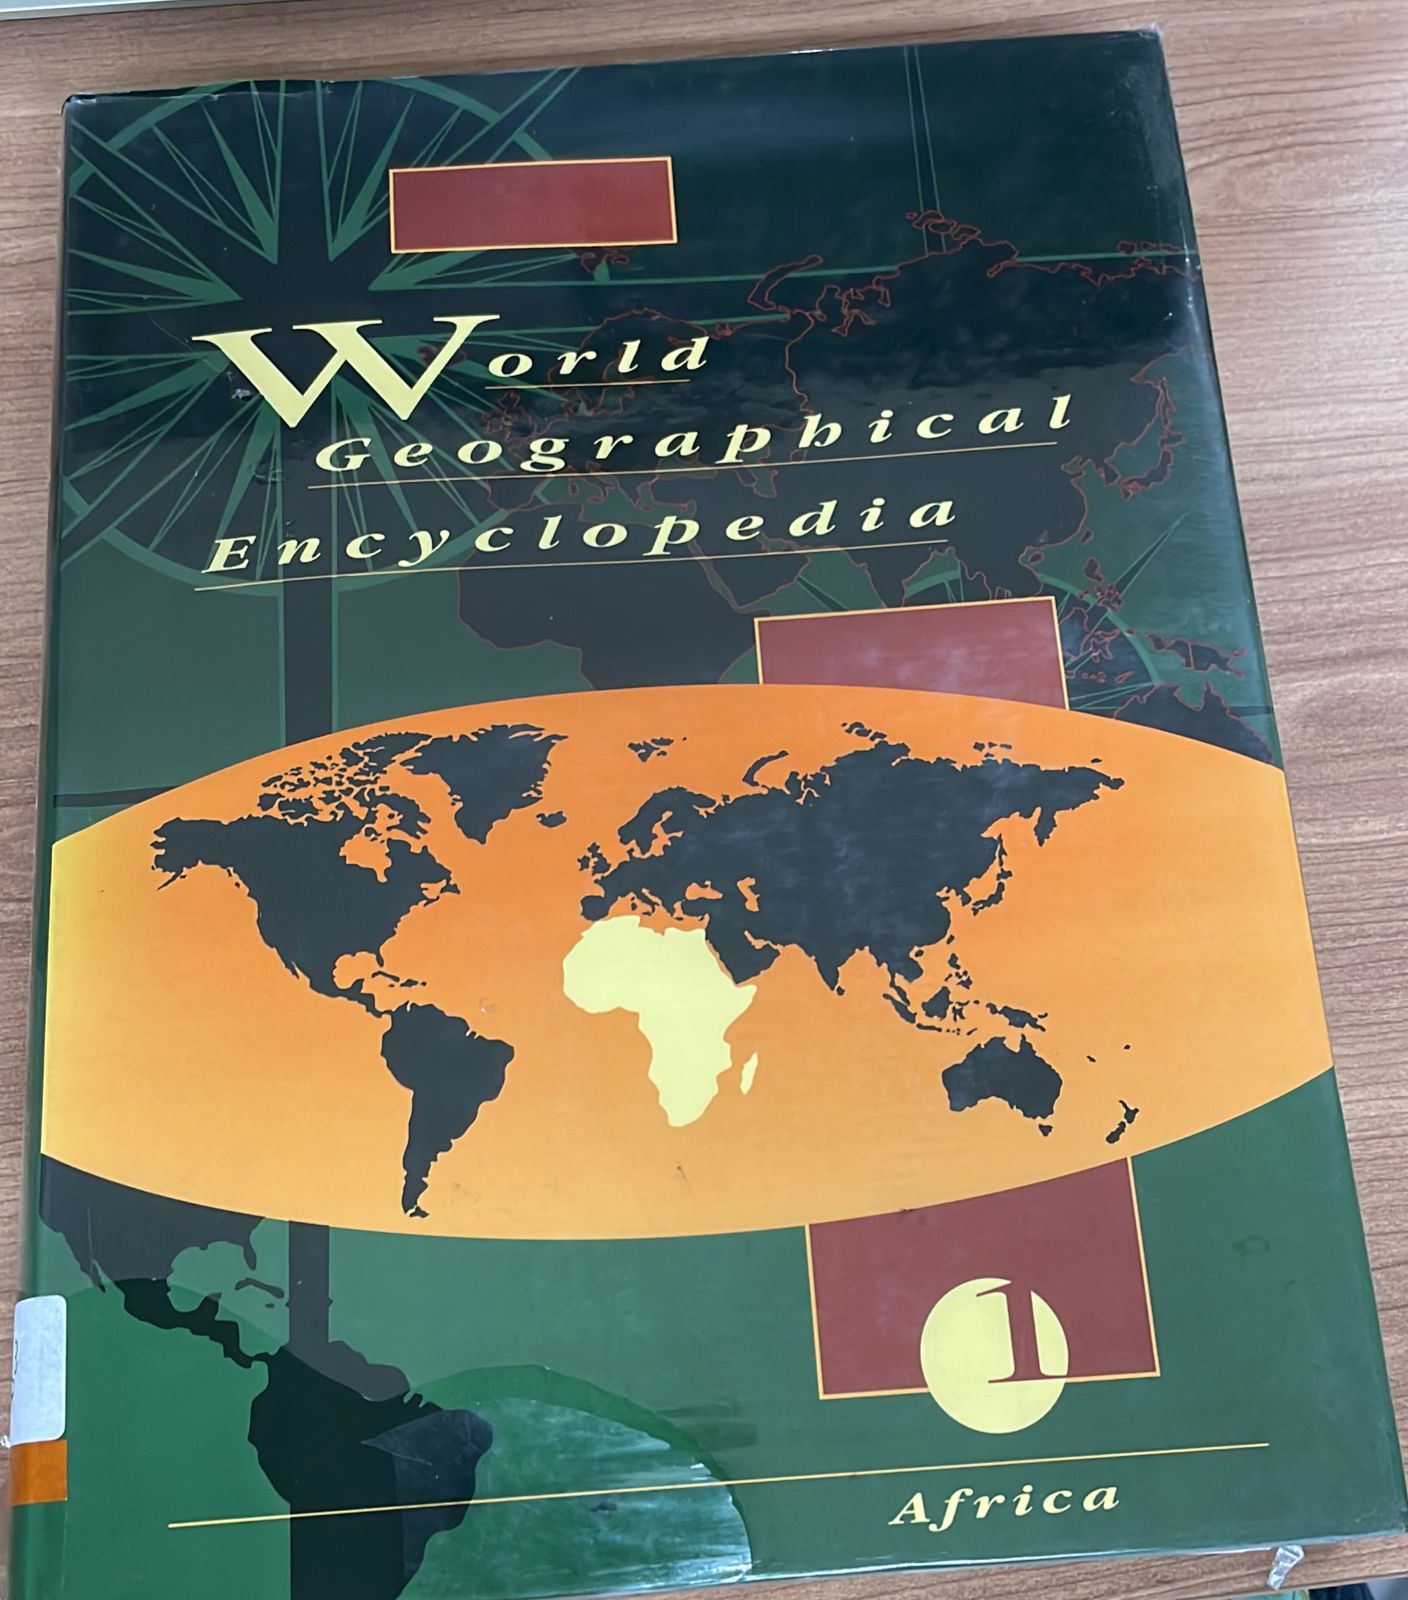 World Geographical Encyclopedia Volume 1 :  Africa